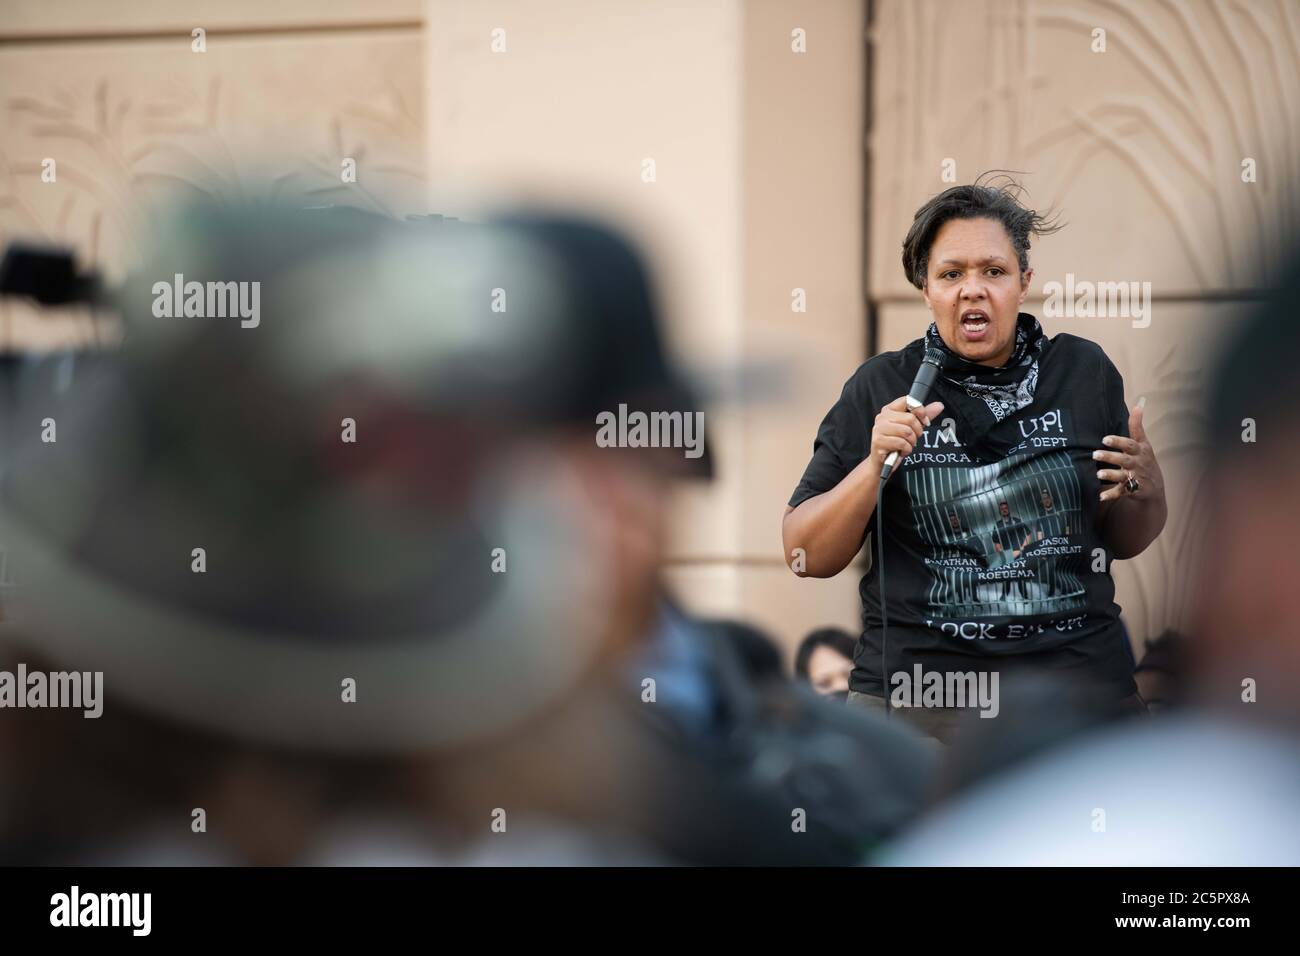 Aurora, Colorado, USA. 3rd July, 2020. McClain family friend, Candace Bailey, pumps up a crowd before a march in Aurora, Colorado on Friday July 3rd, 2020 Credit: Tyler Tomasello/ZUMA Wire/Alamy Live News Stock Photo